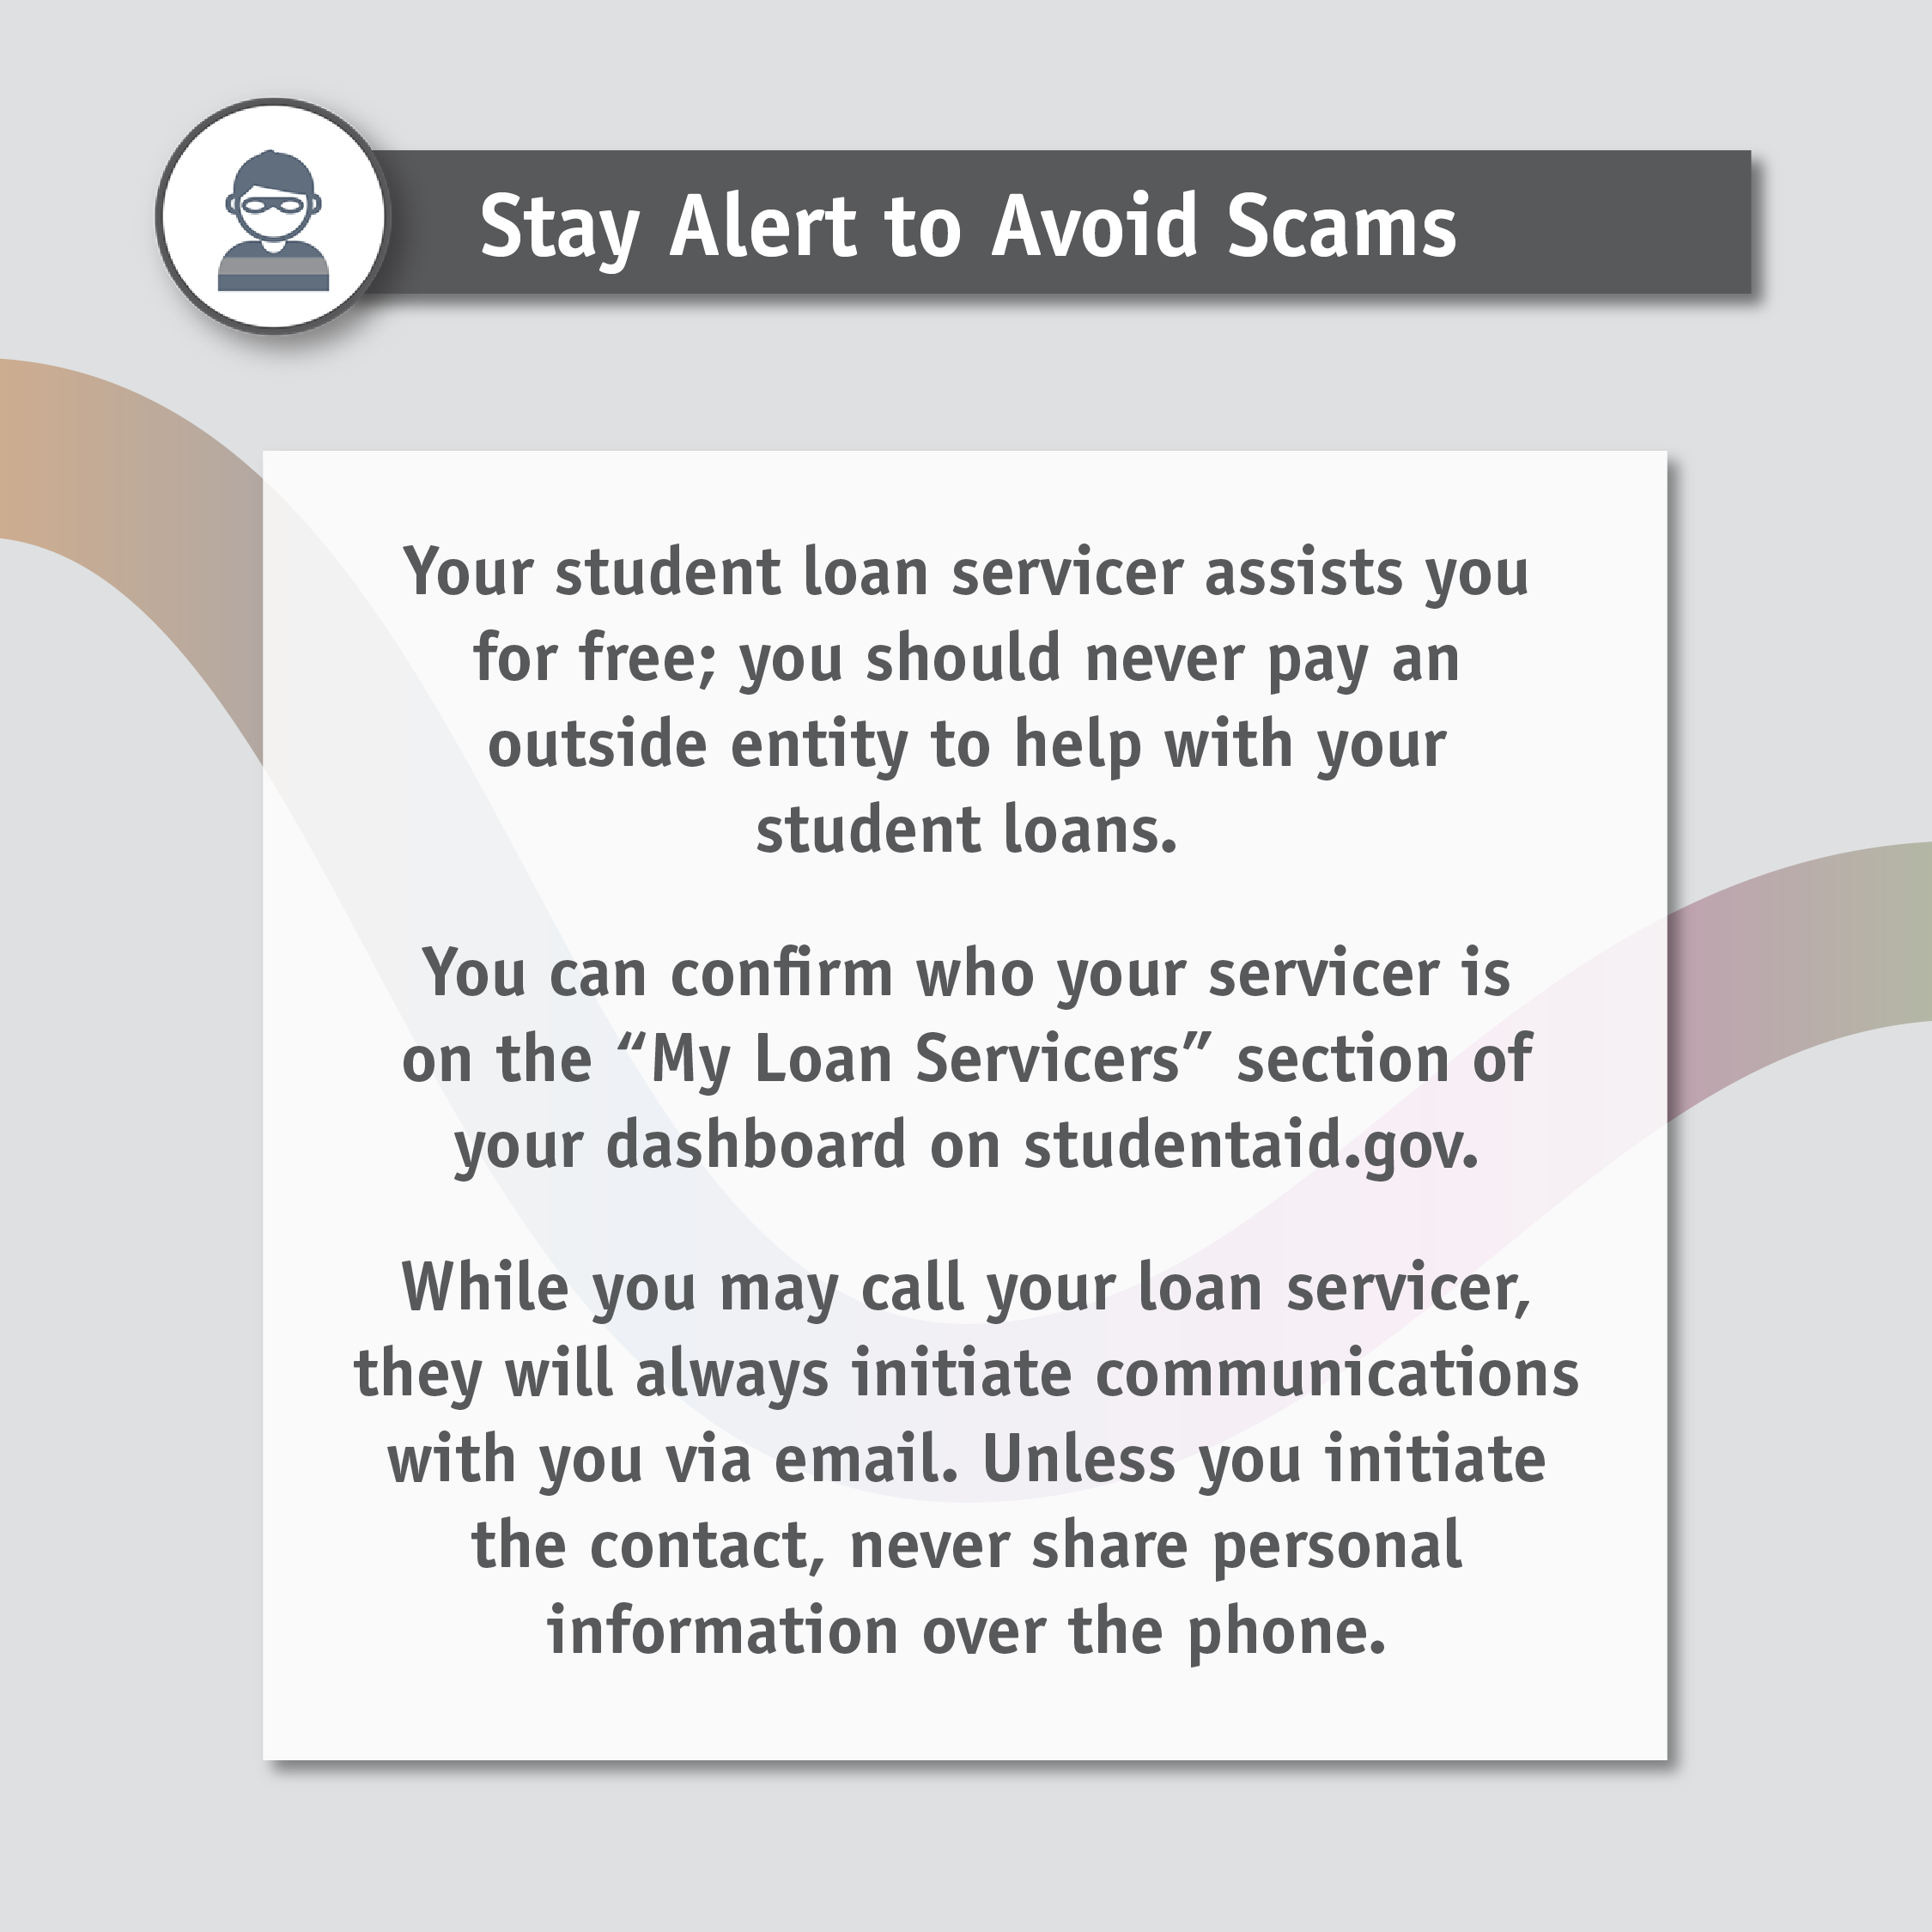 Stay Alert to Avoid Scams infographic